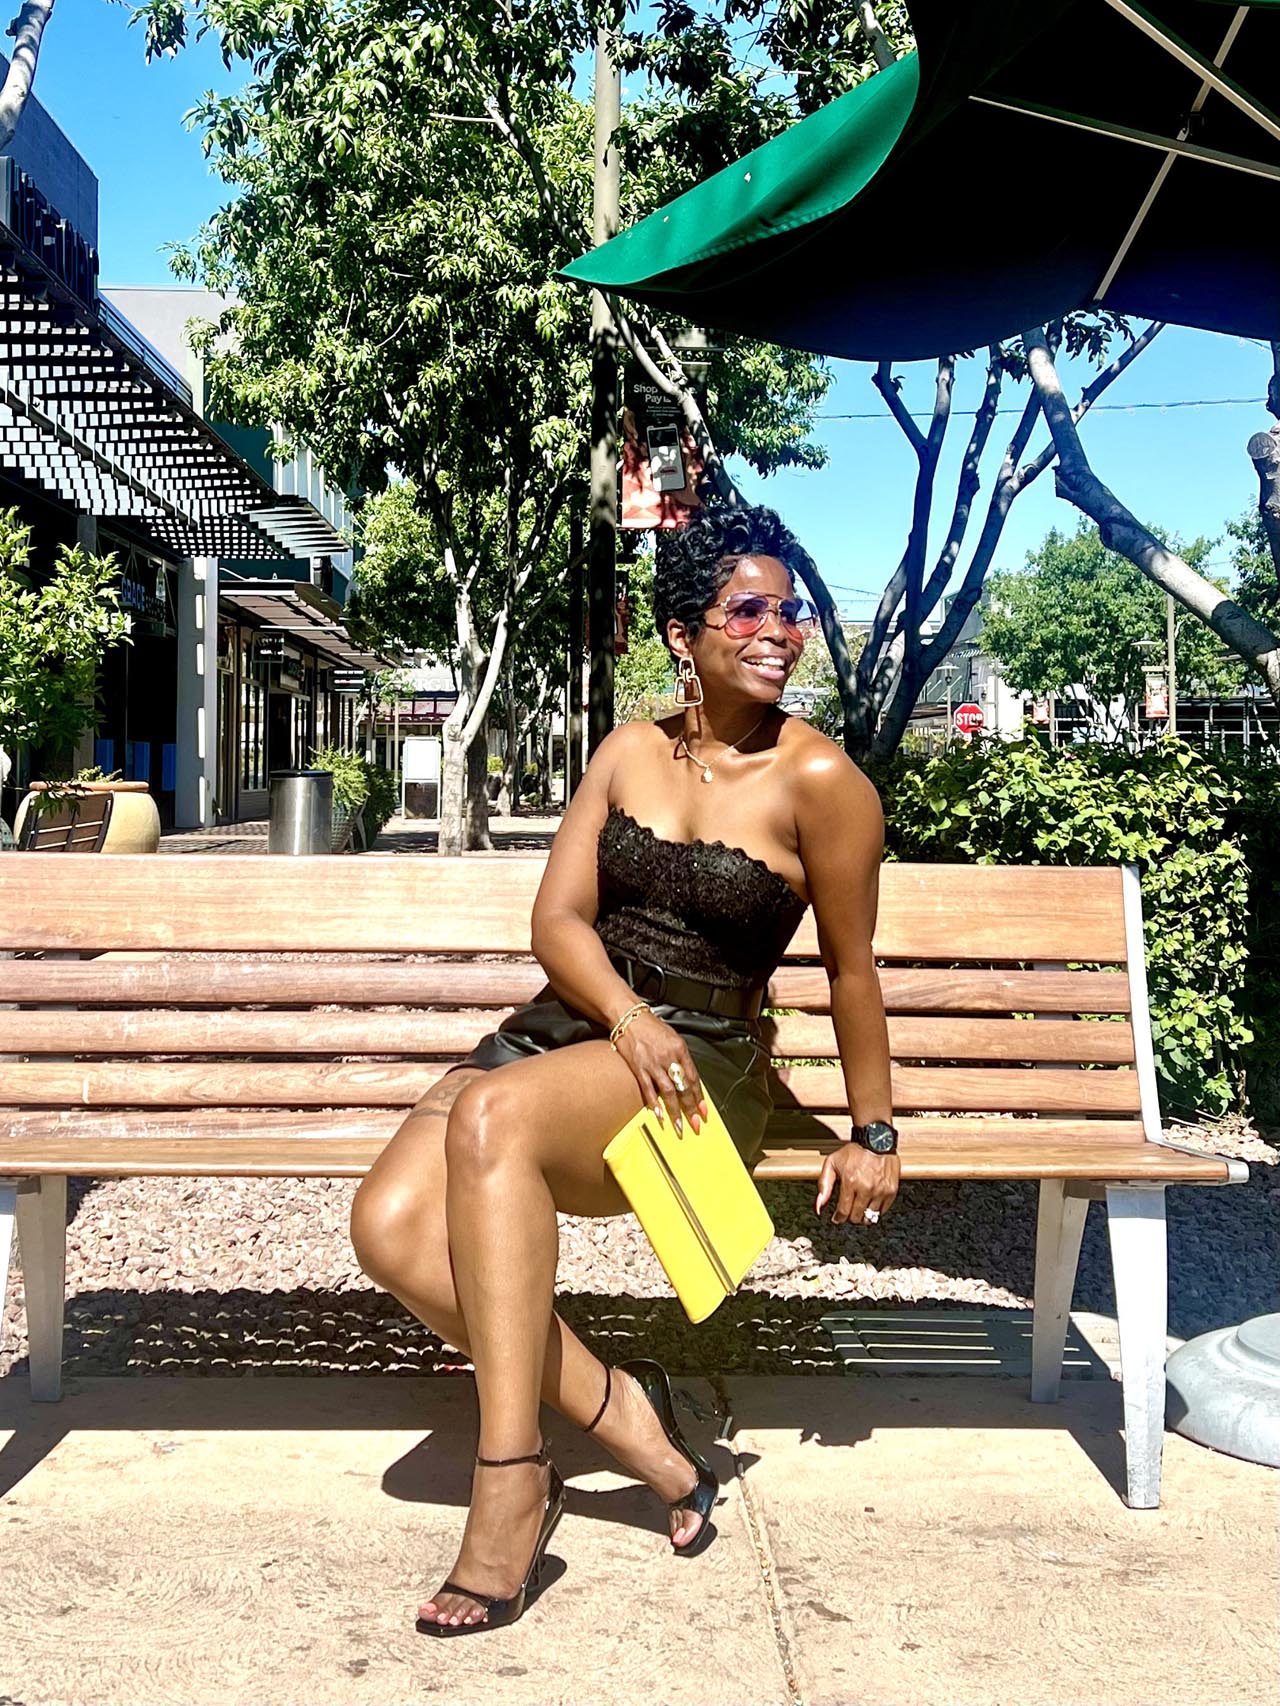 Black bustier black leather shorts yellow purse sitting on bench